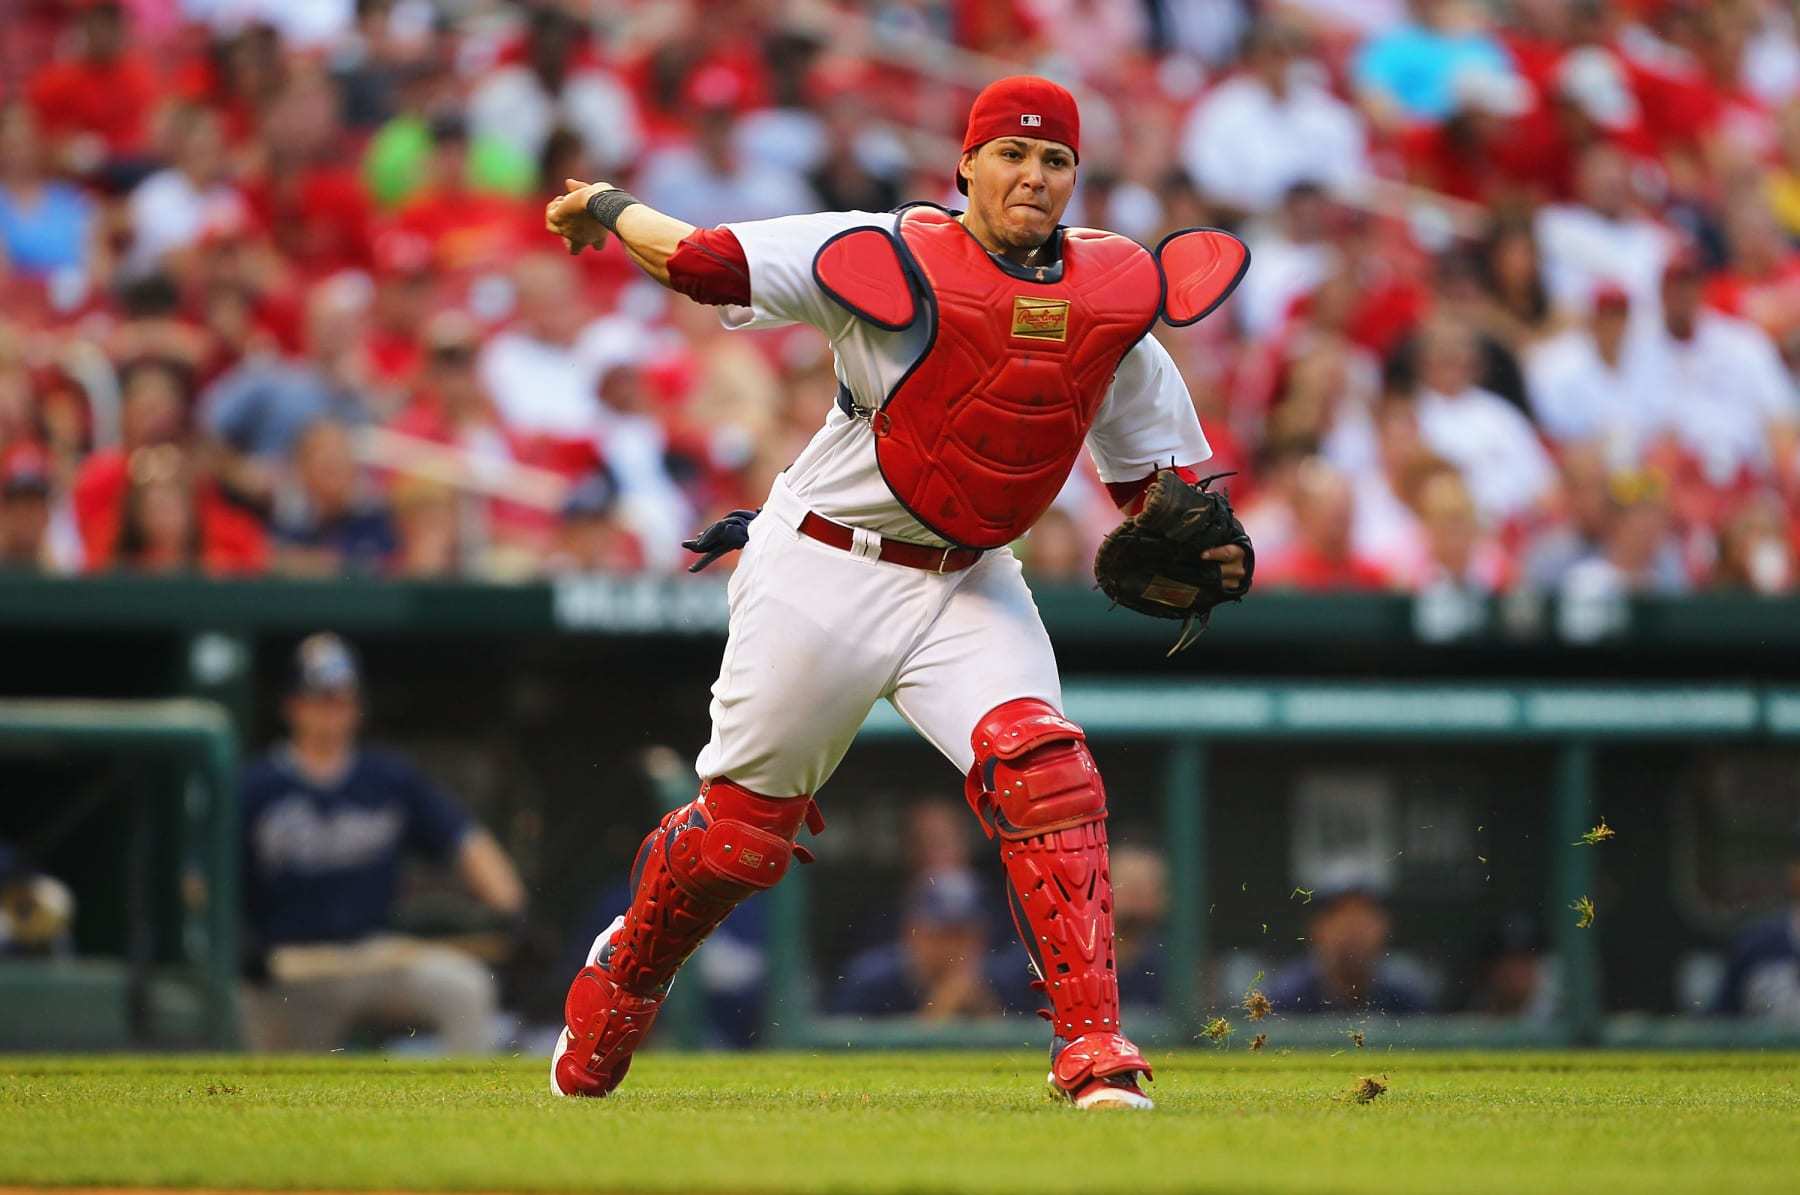 Has Yadier Molina Successfully Framed His Hall of Fame Case